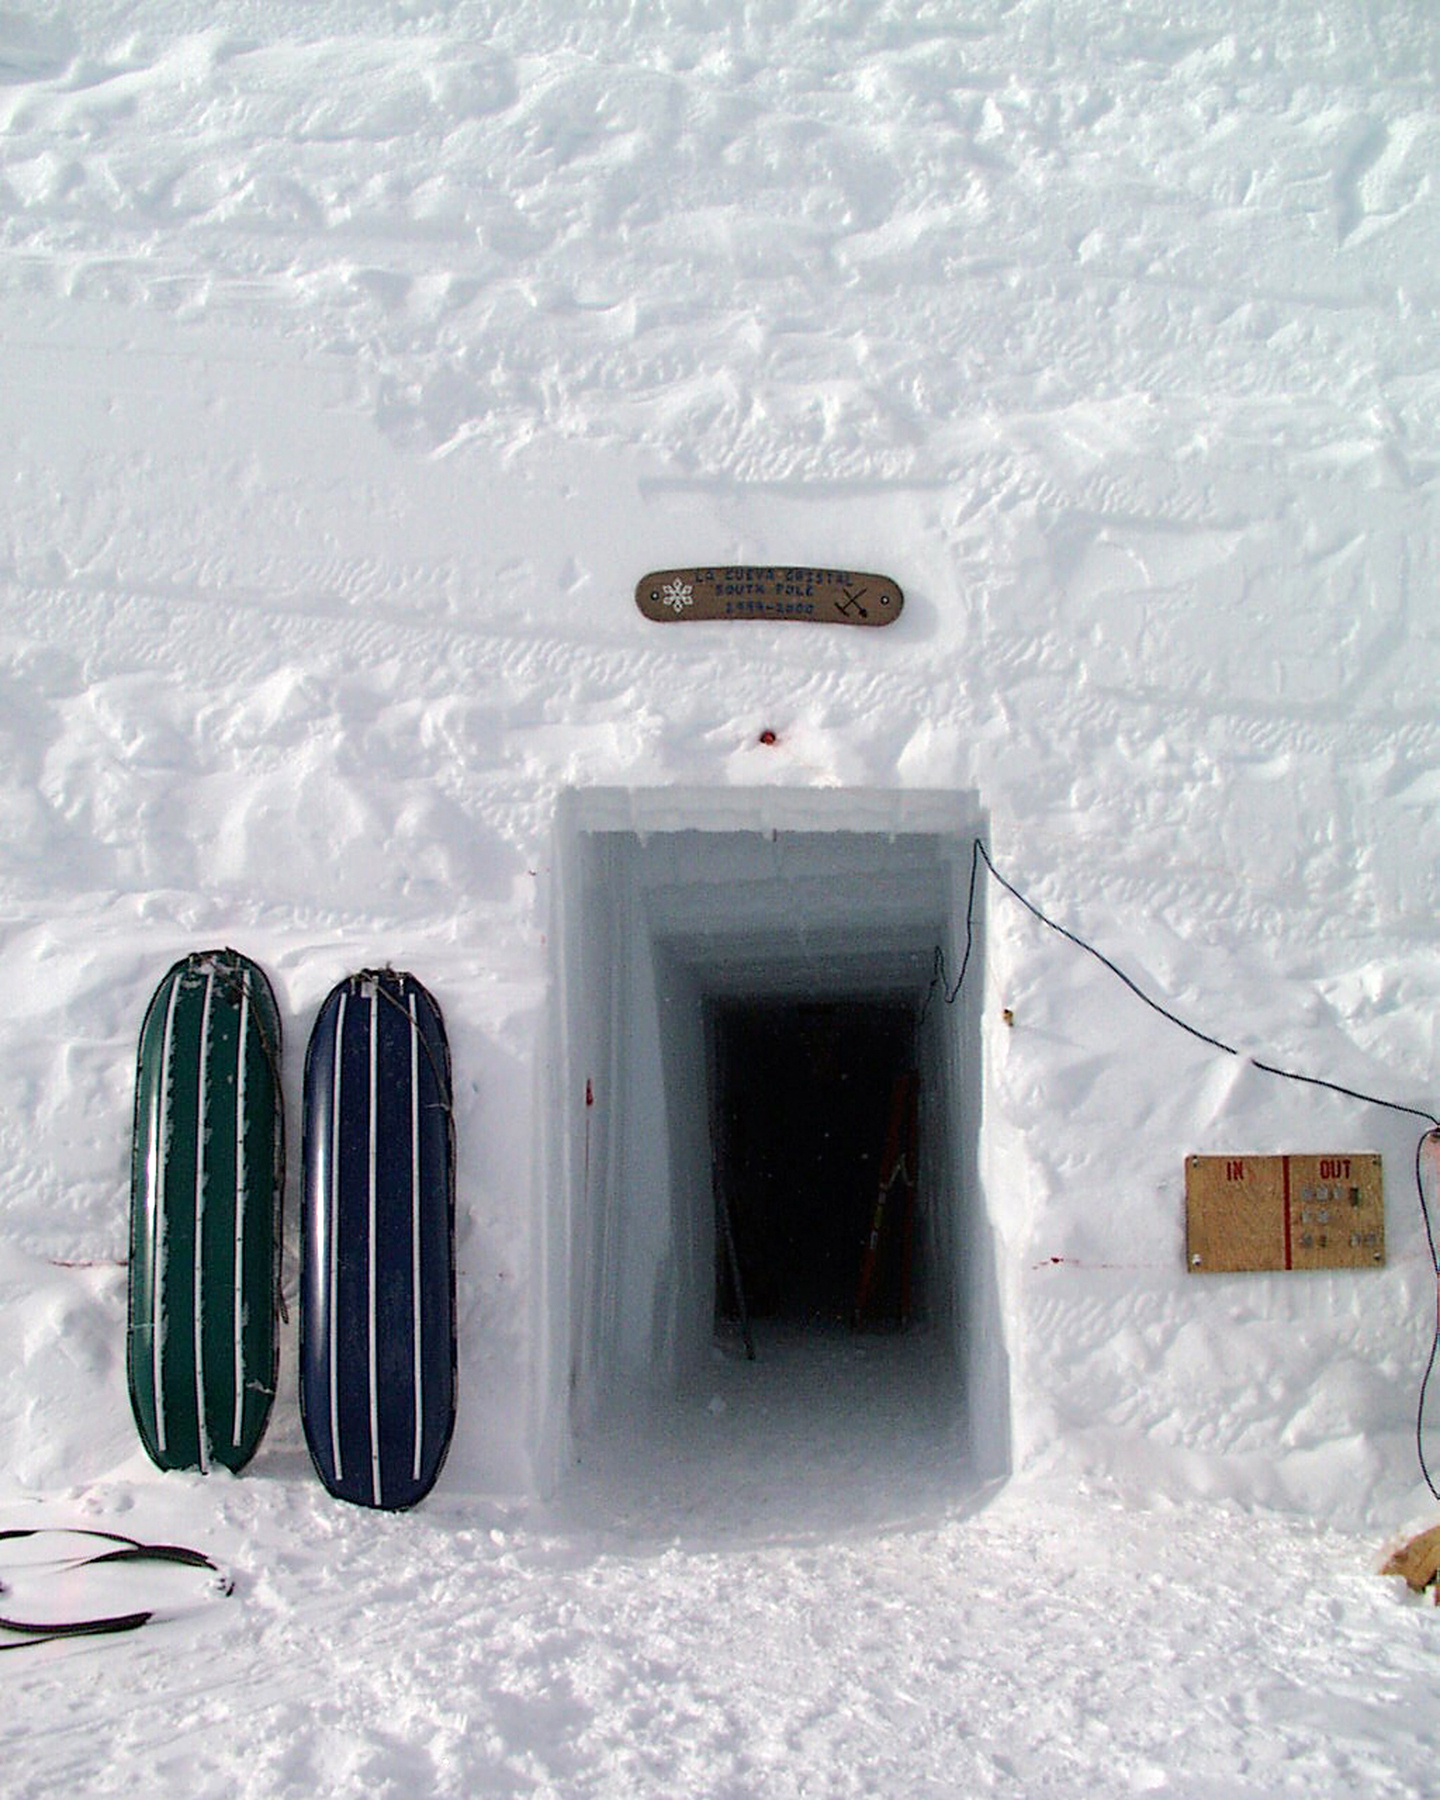 An entrance is cut into a solid wall of snow.